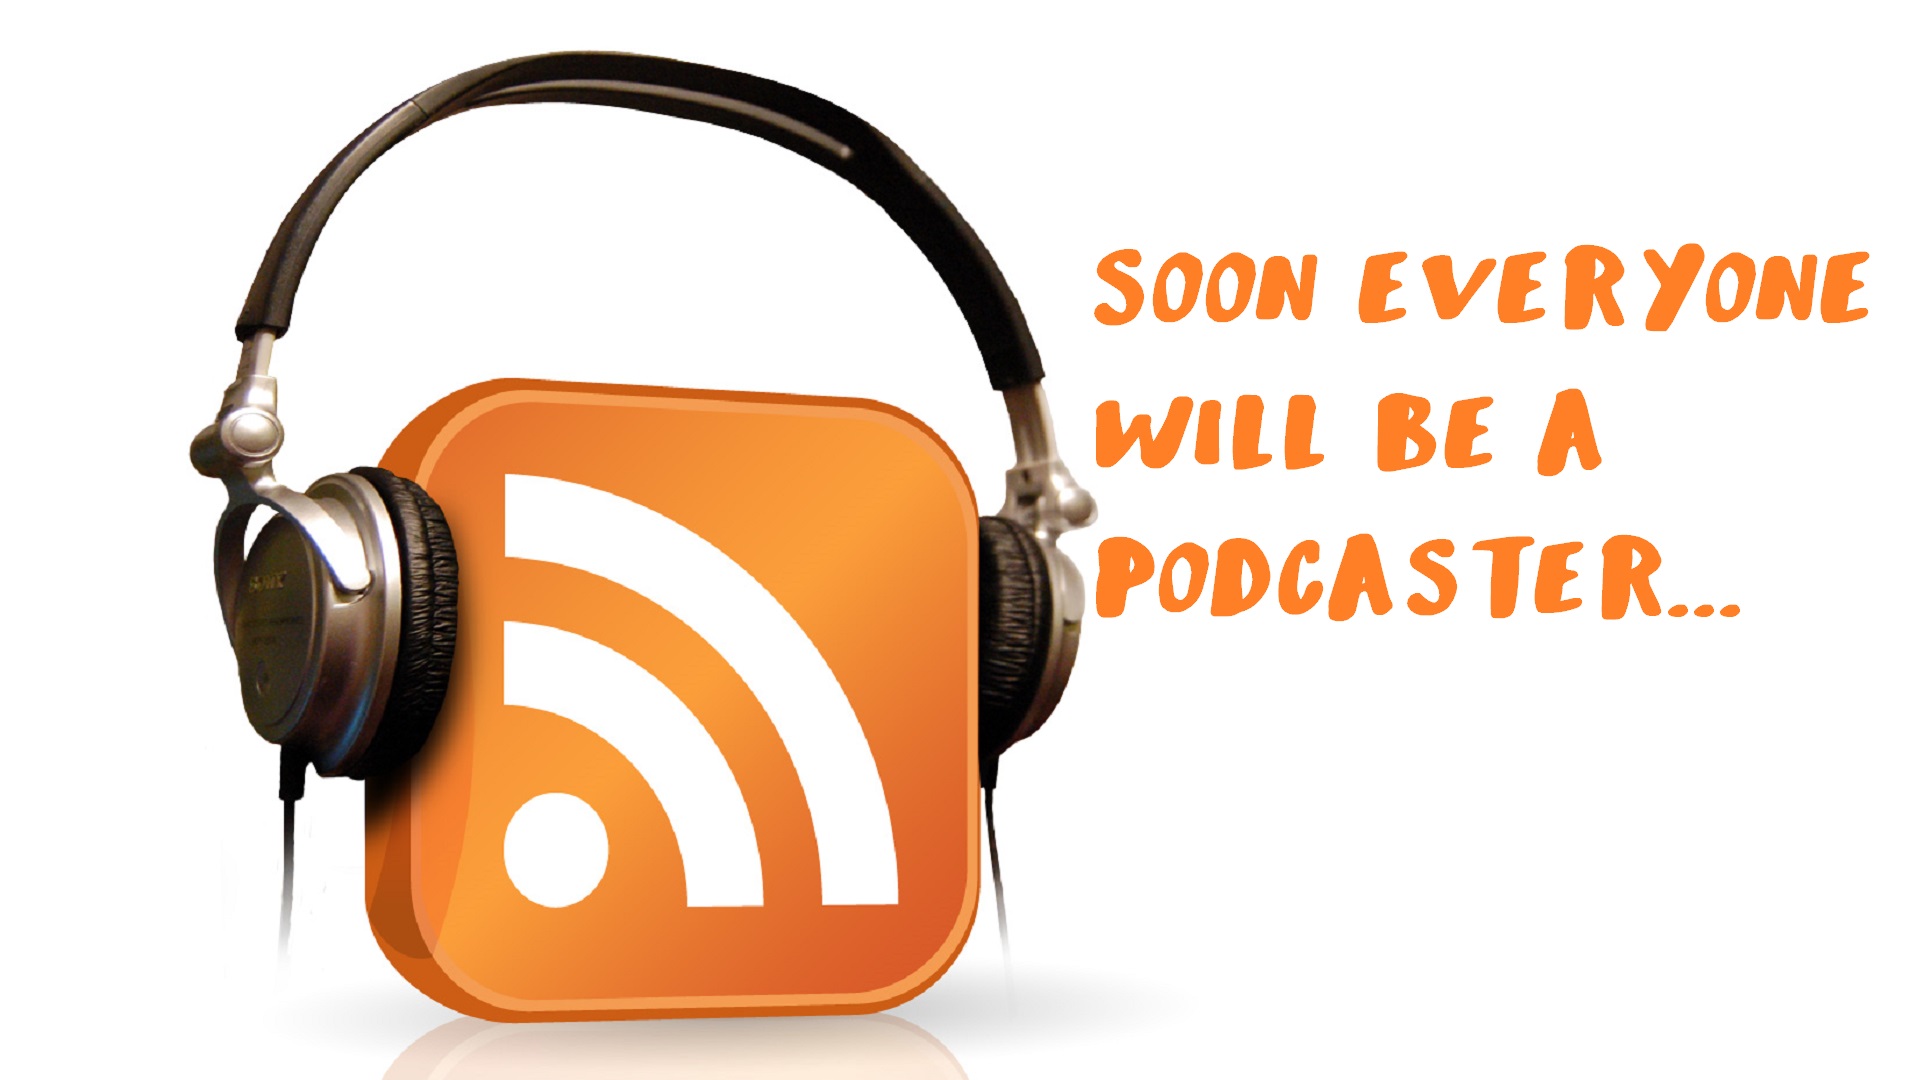 Soon everyone will be a Podcaster...